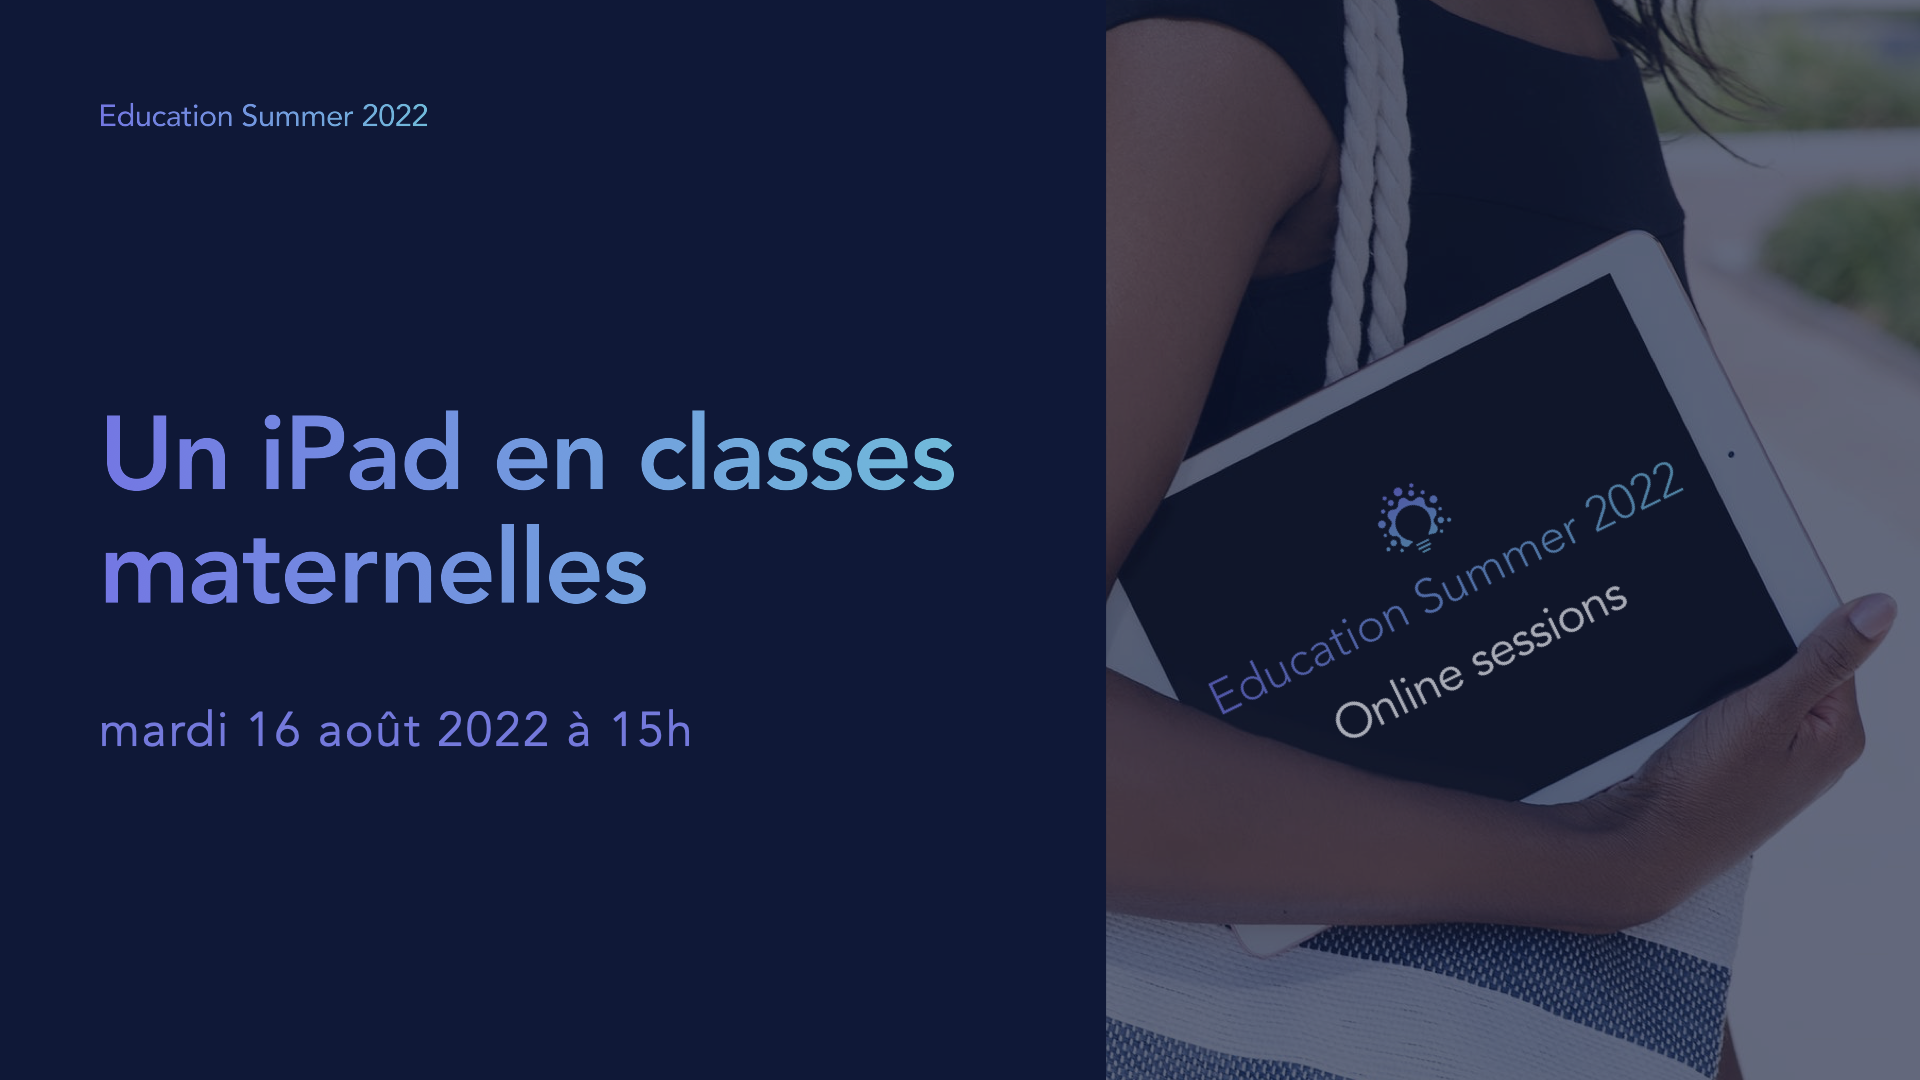  Education Summer 2022-Sessions.002